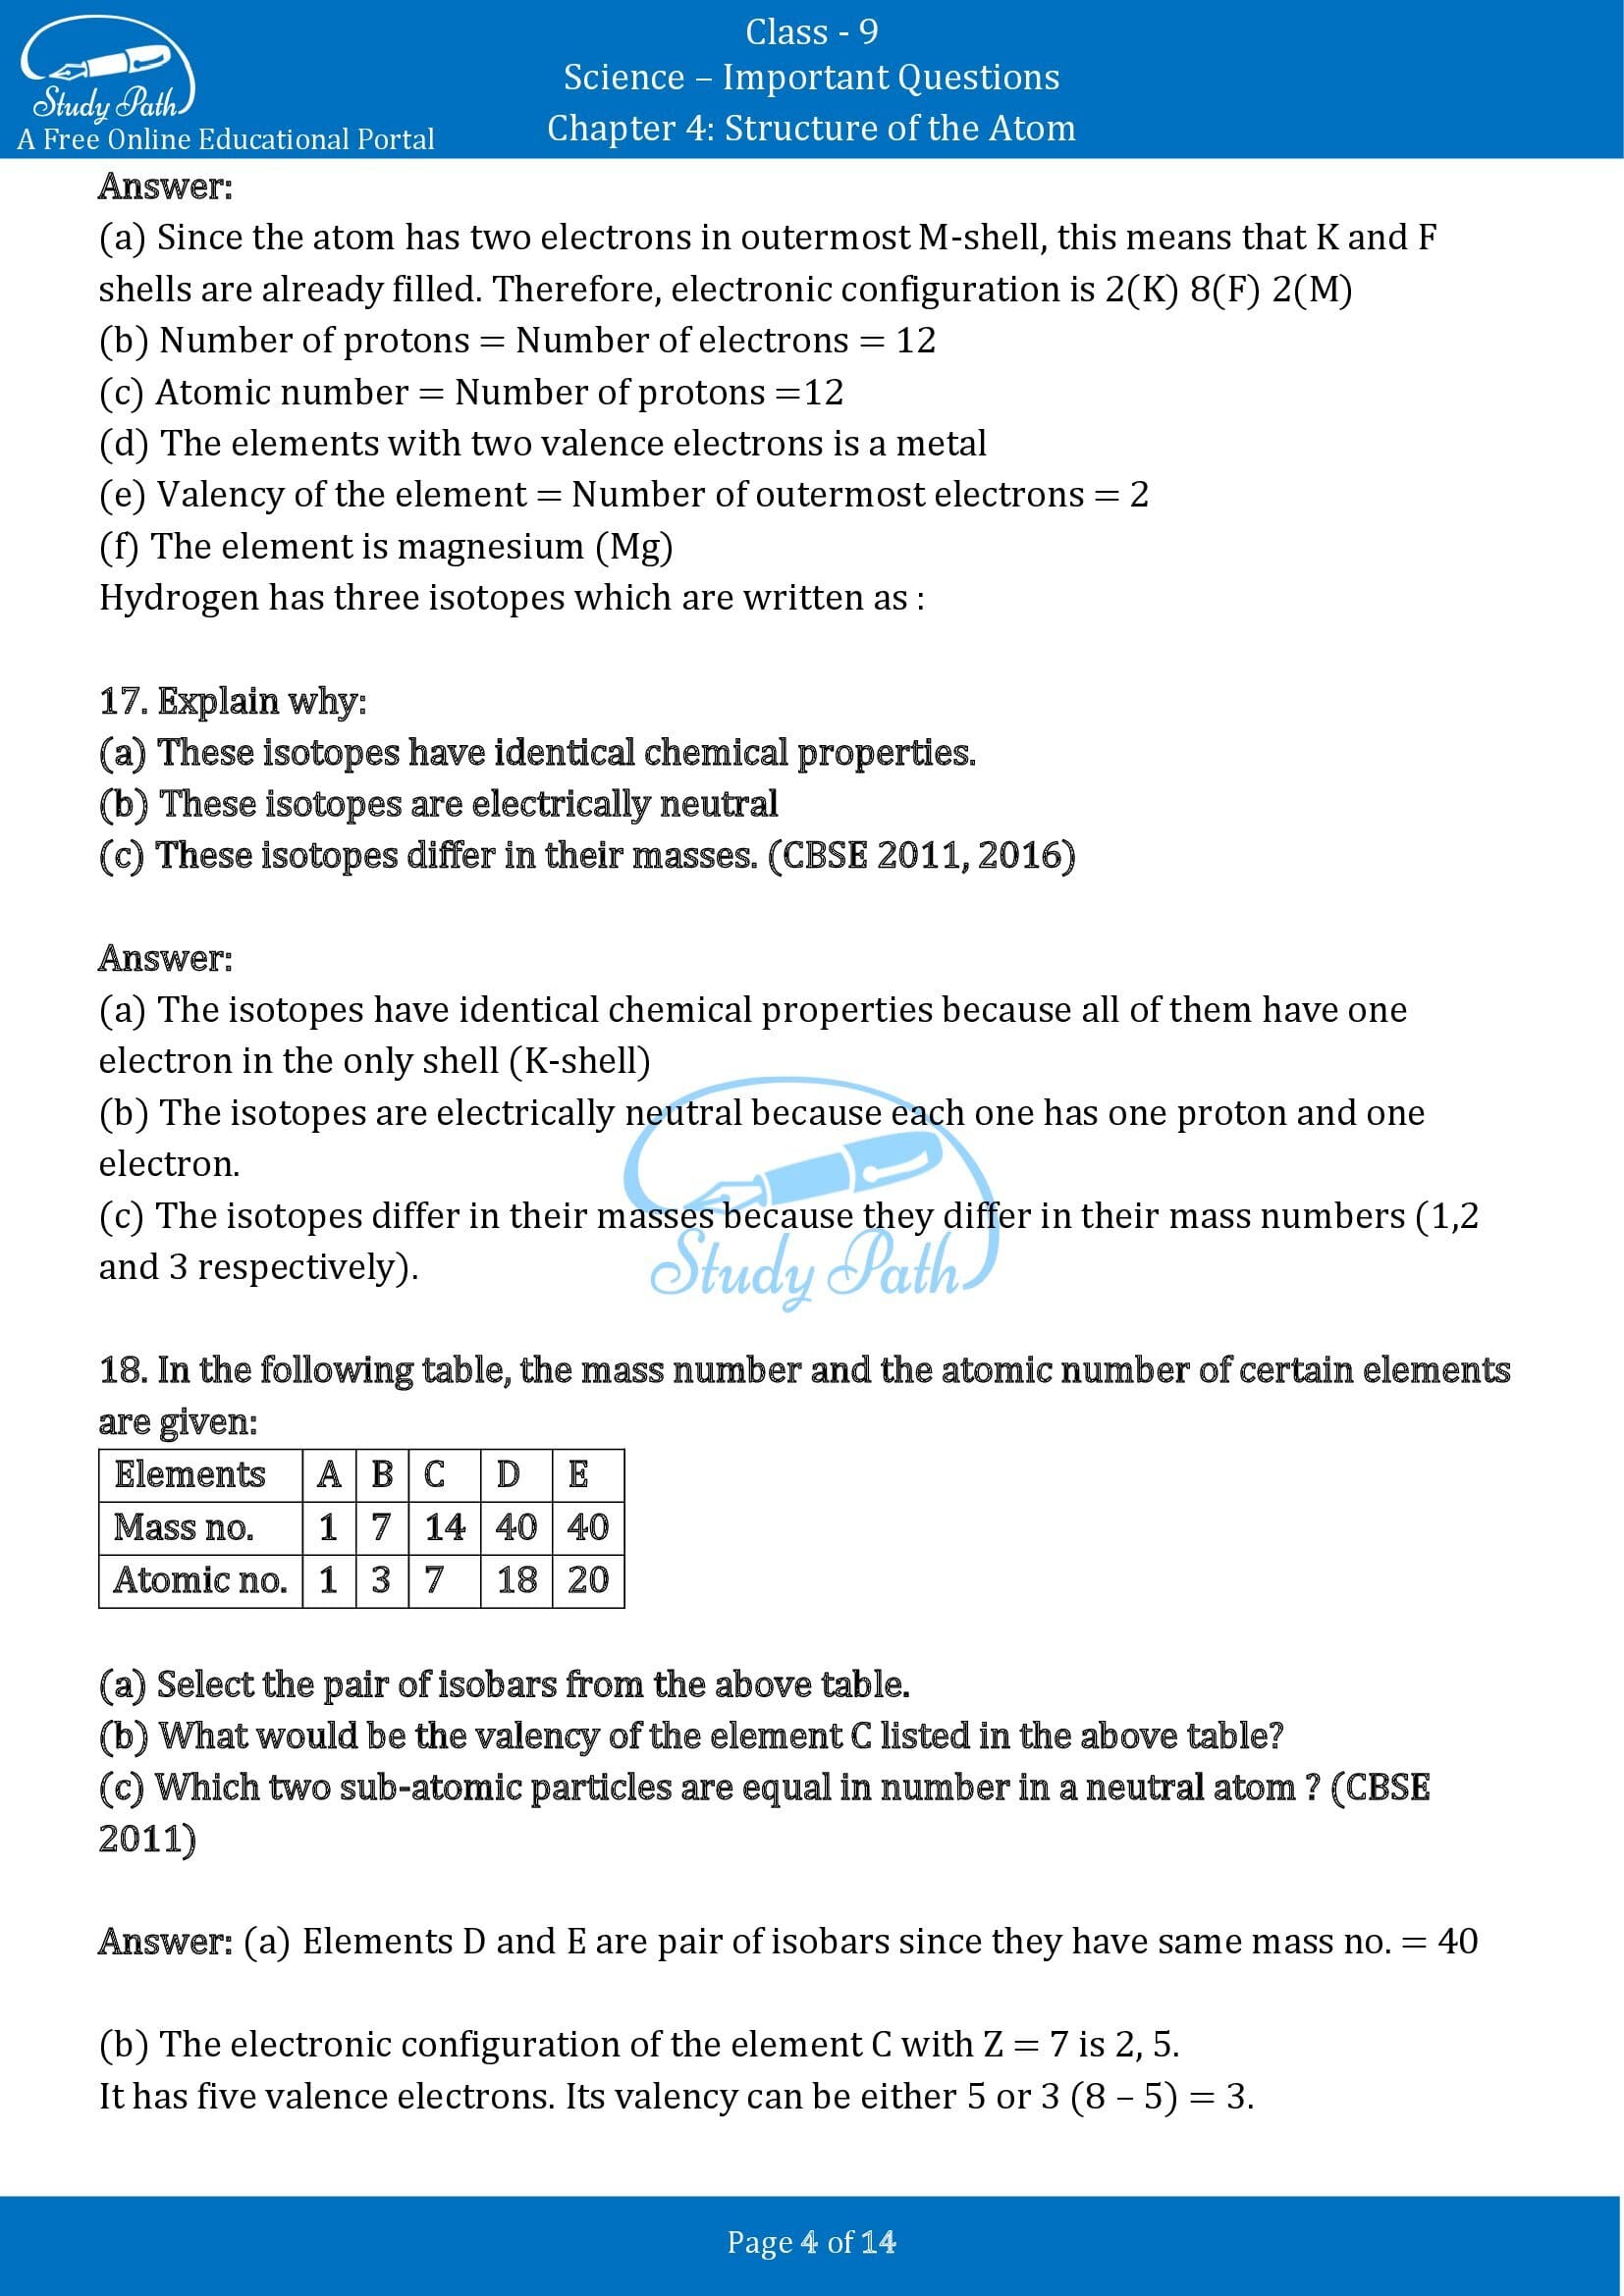 Important Questions for Class 9 Science Chapter 4 Structure of the Atom 00004